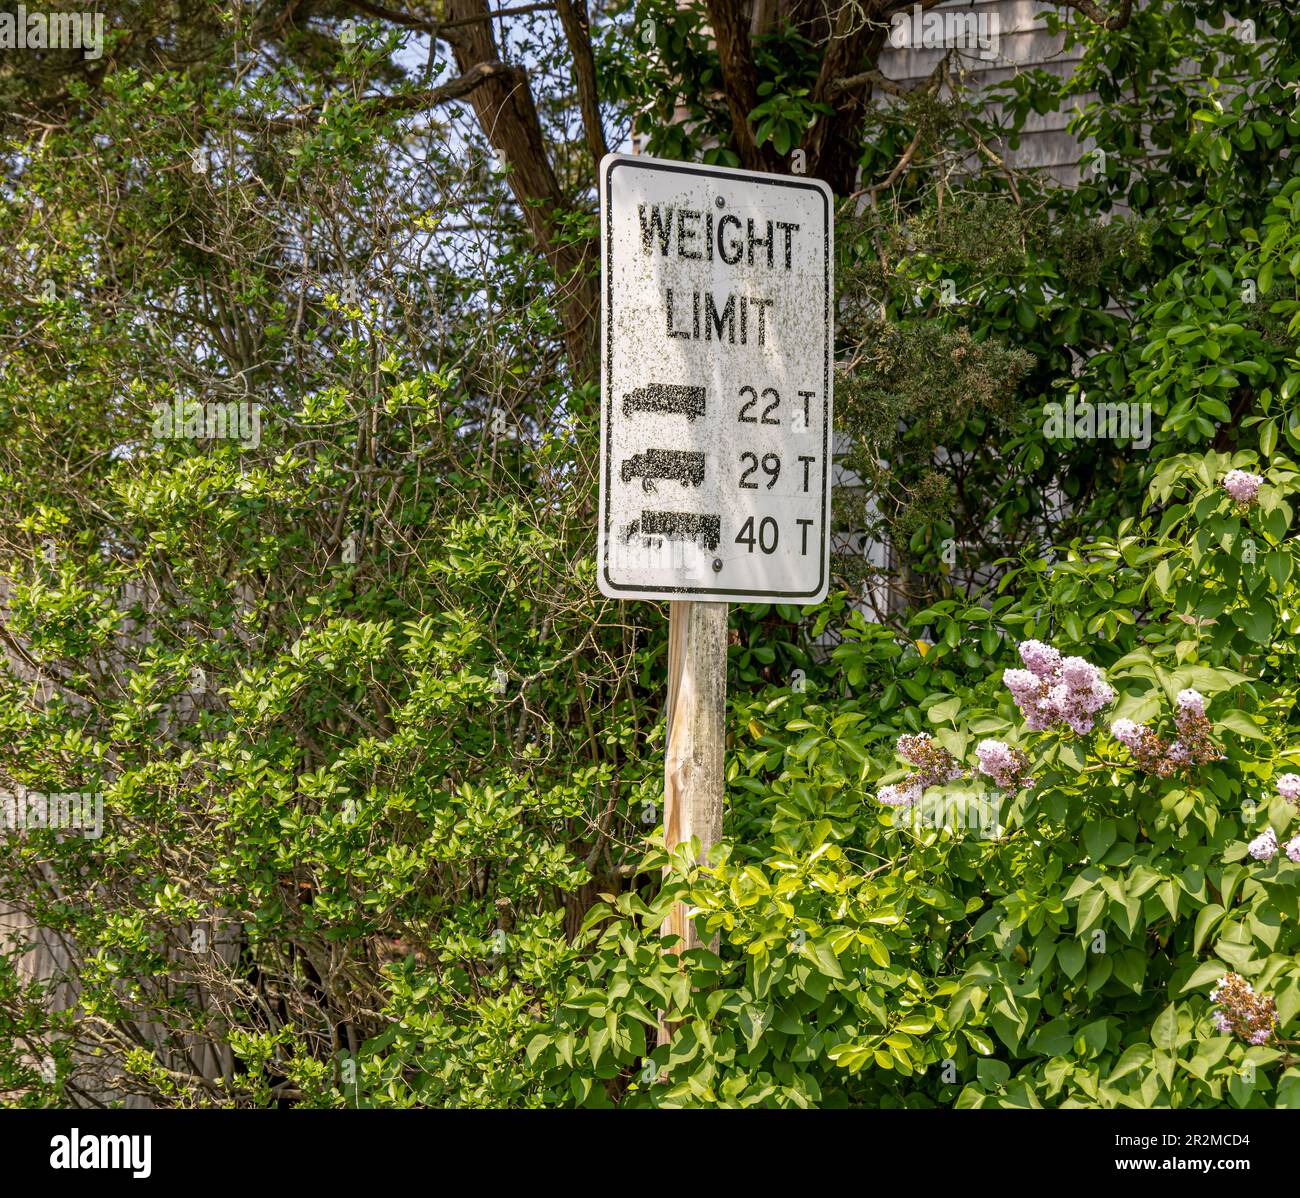 old weight limit size stating weights for trucks Stock Photo